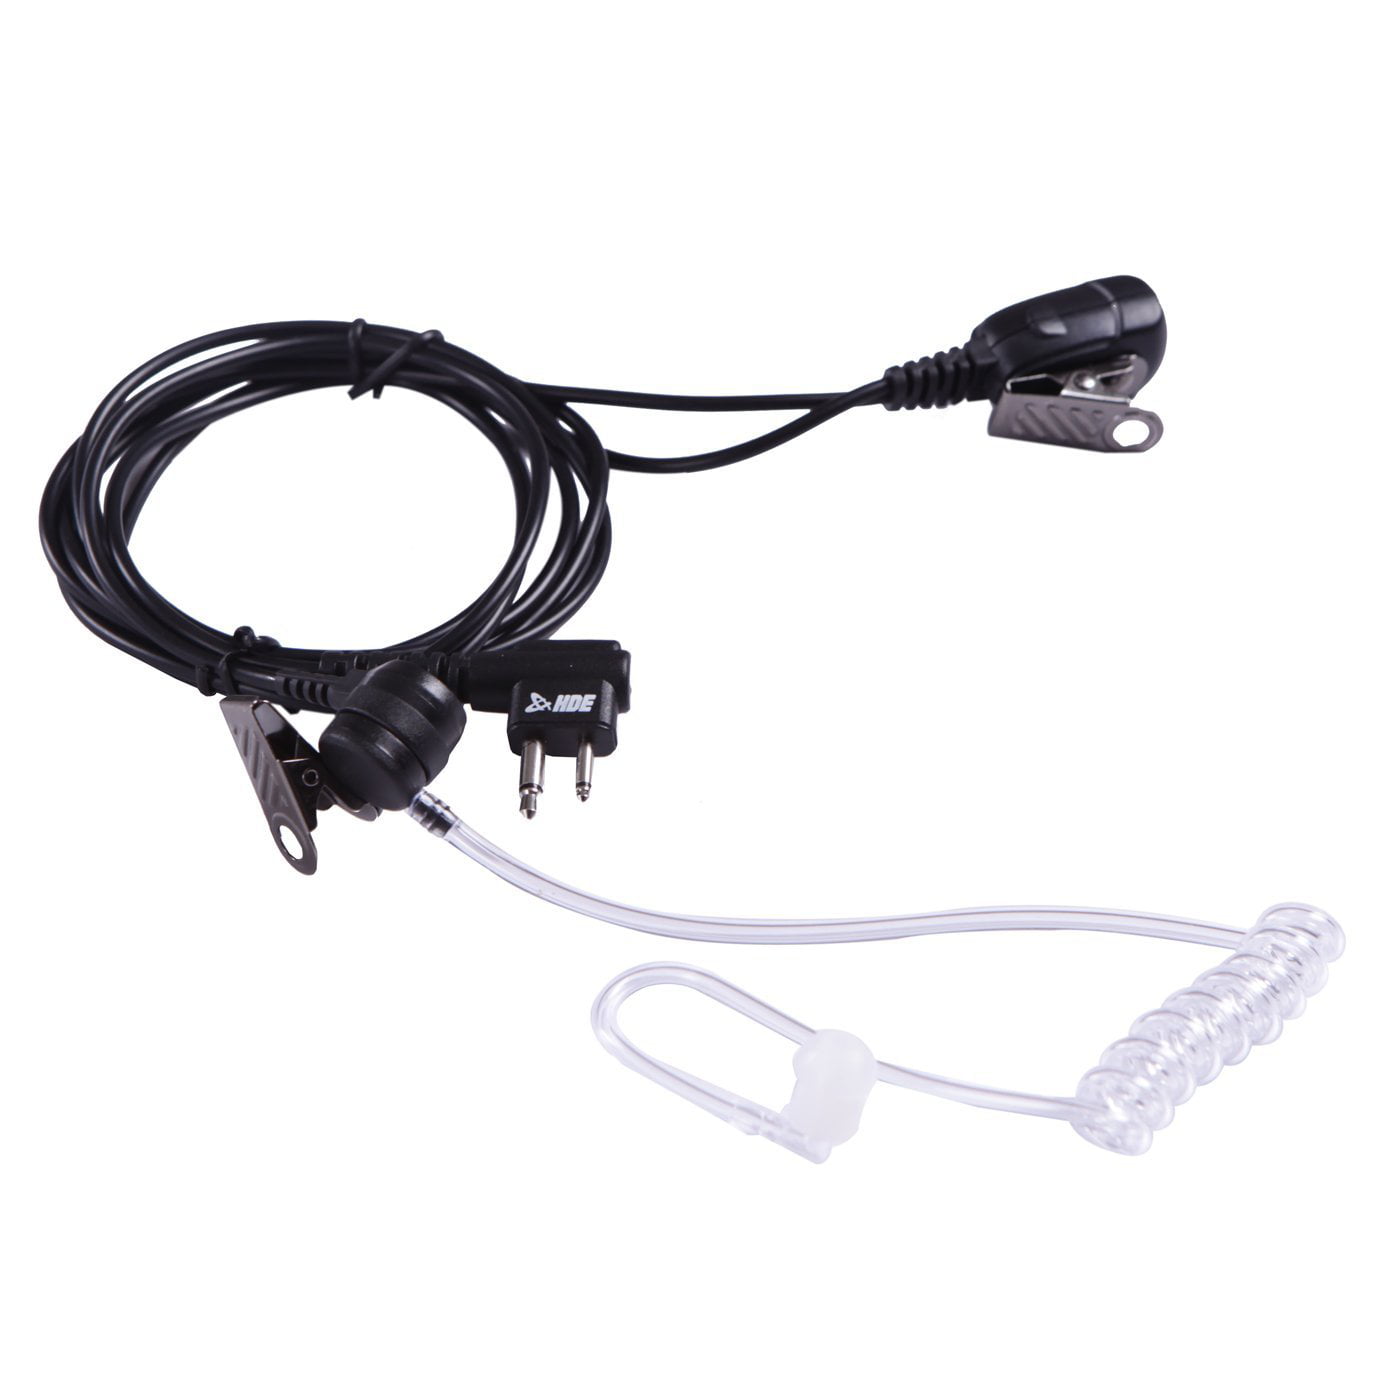 2 PIN Mic Covert Acoustic Tube EARPIECE HEADSET For Motorola Radio Security NEW